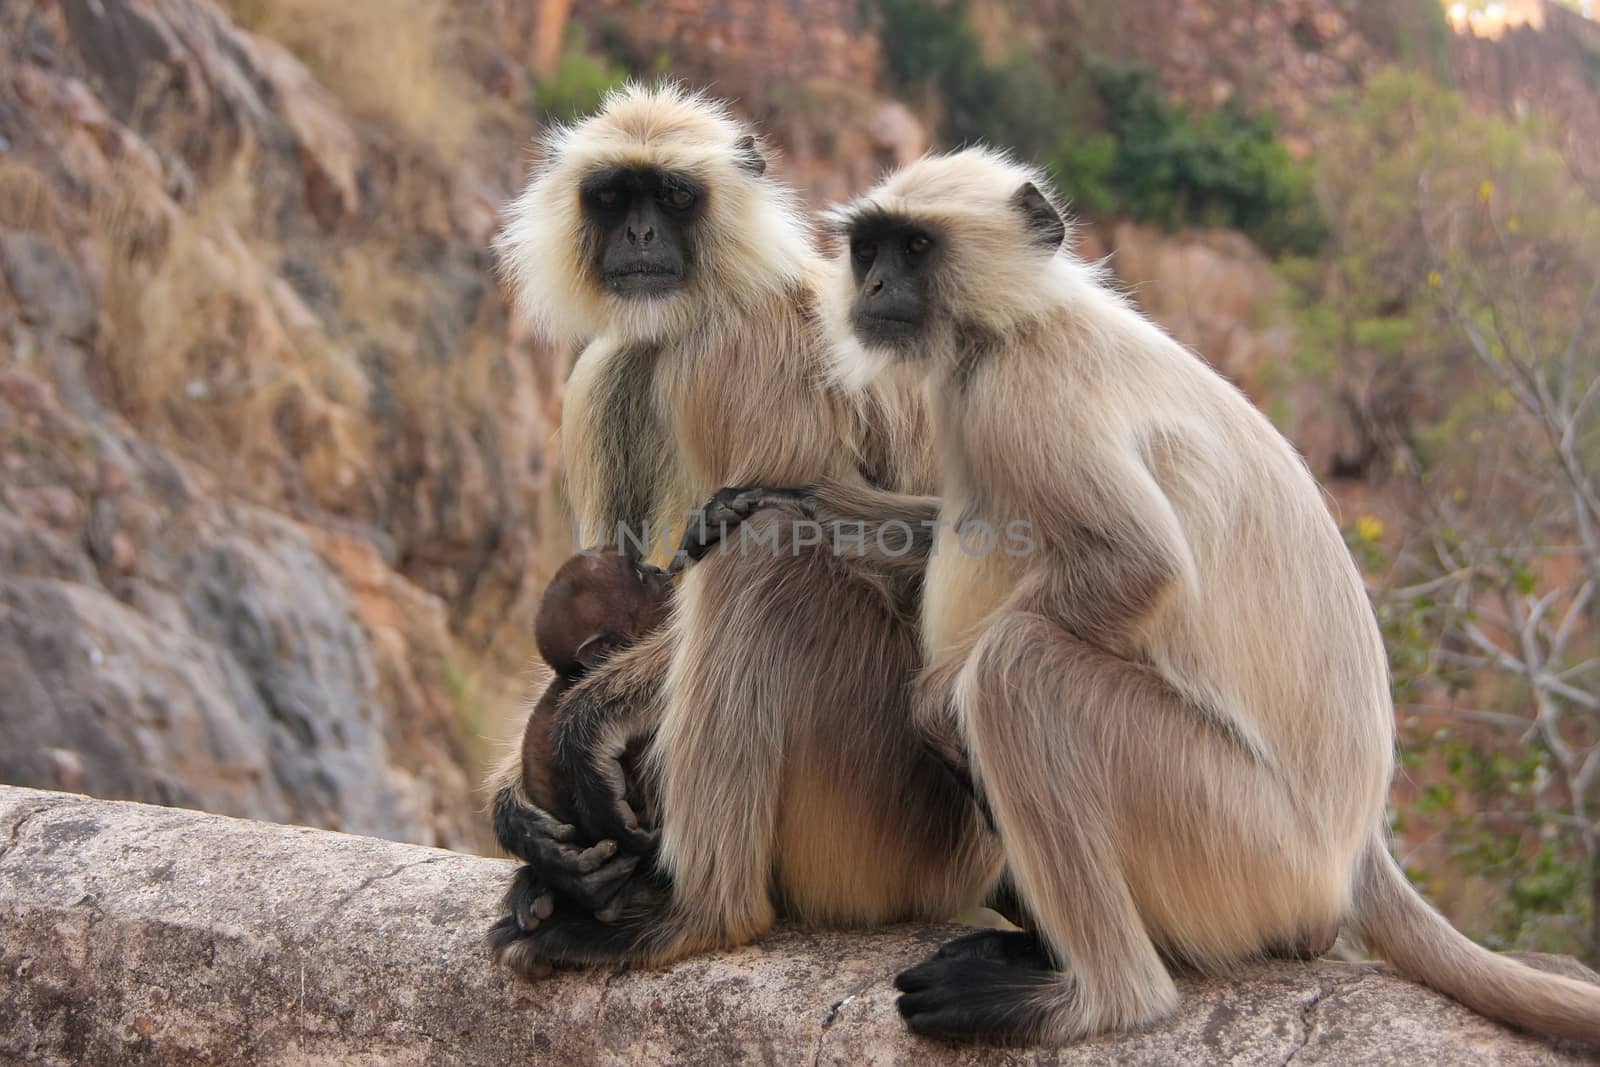 Gray langurs (Semnopithecus dussumieri) with a baby sitting at R by donya_nedomam